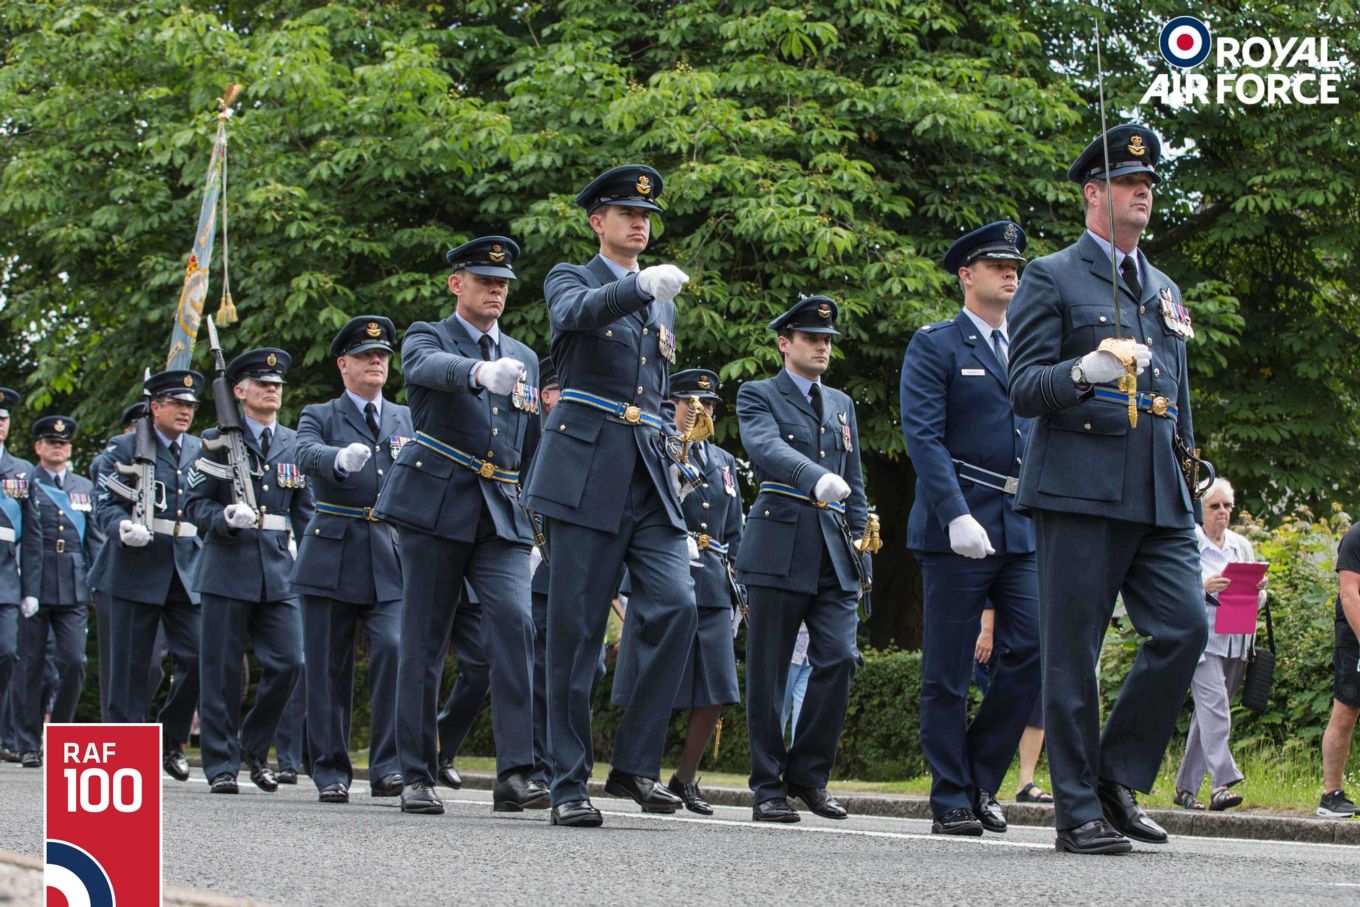 56 Squadron parade in the Freedom of the district